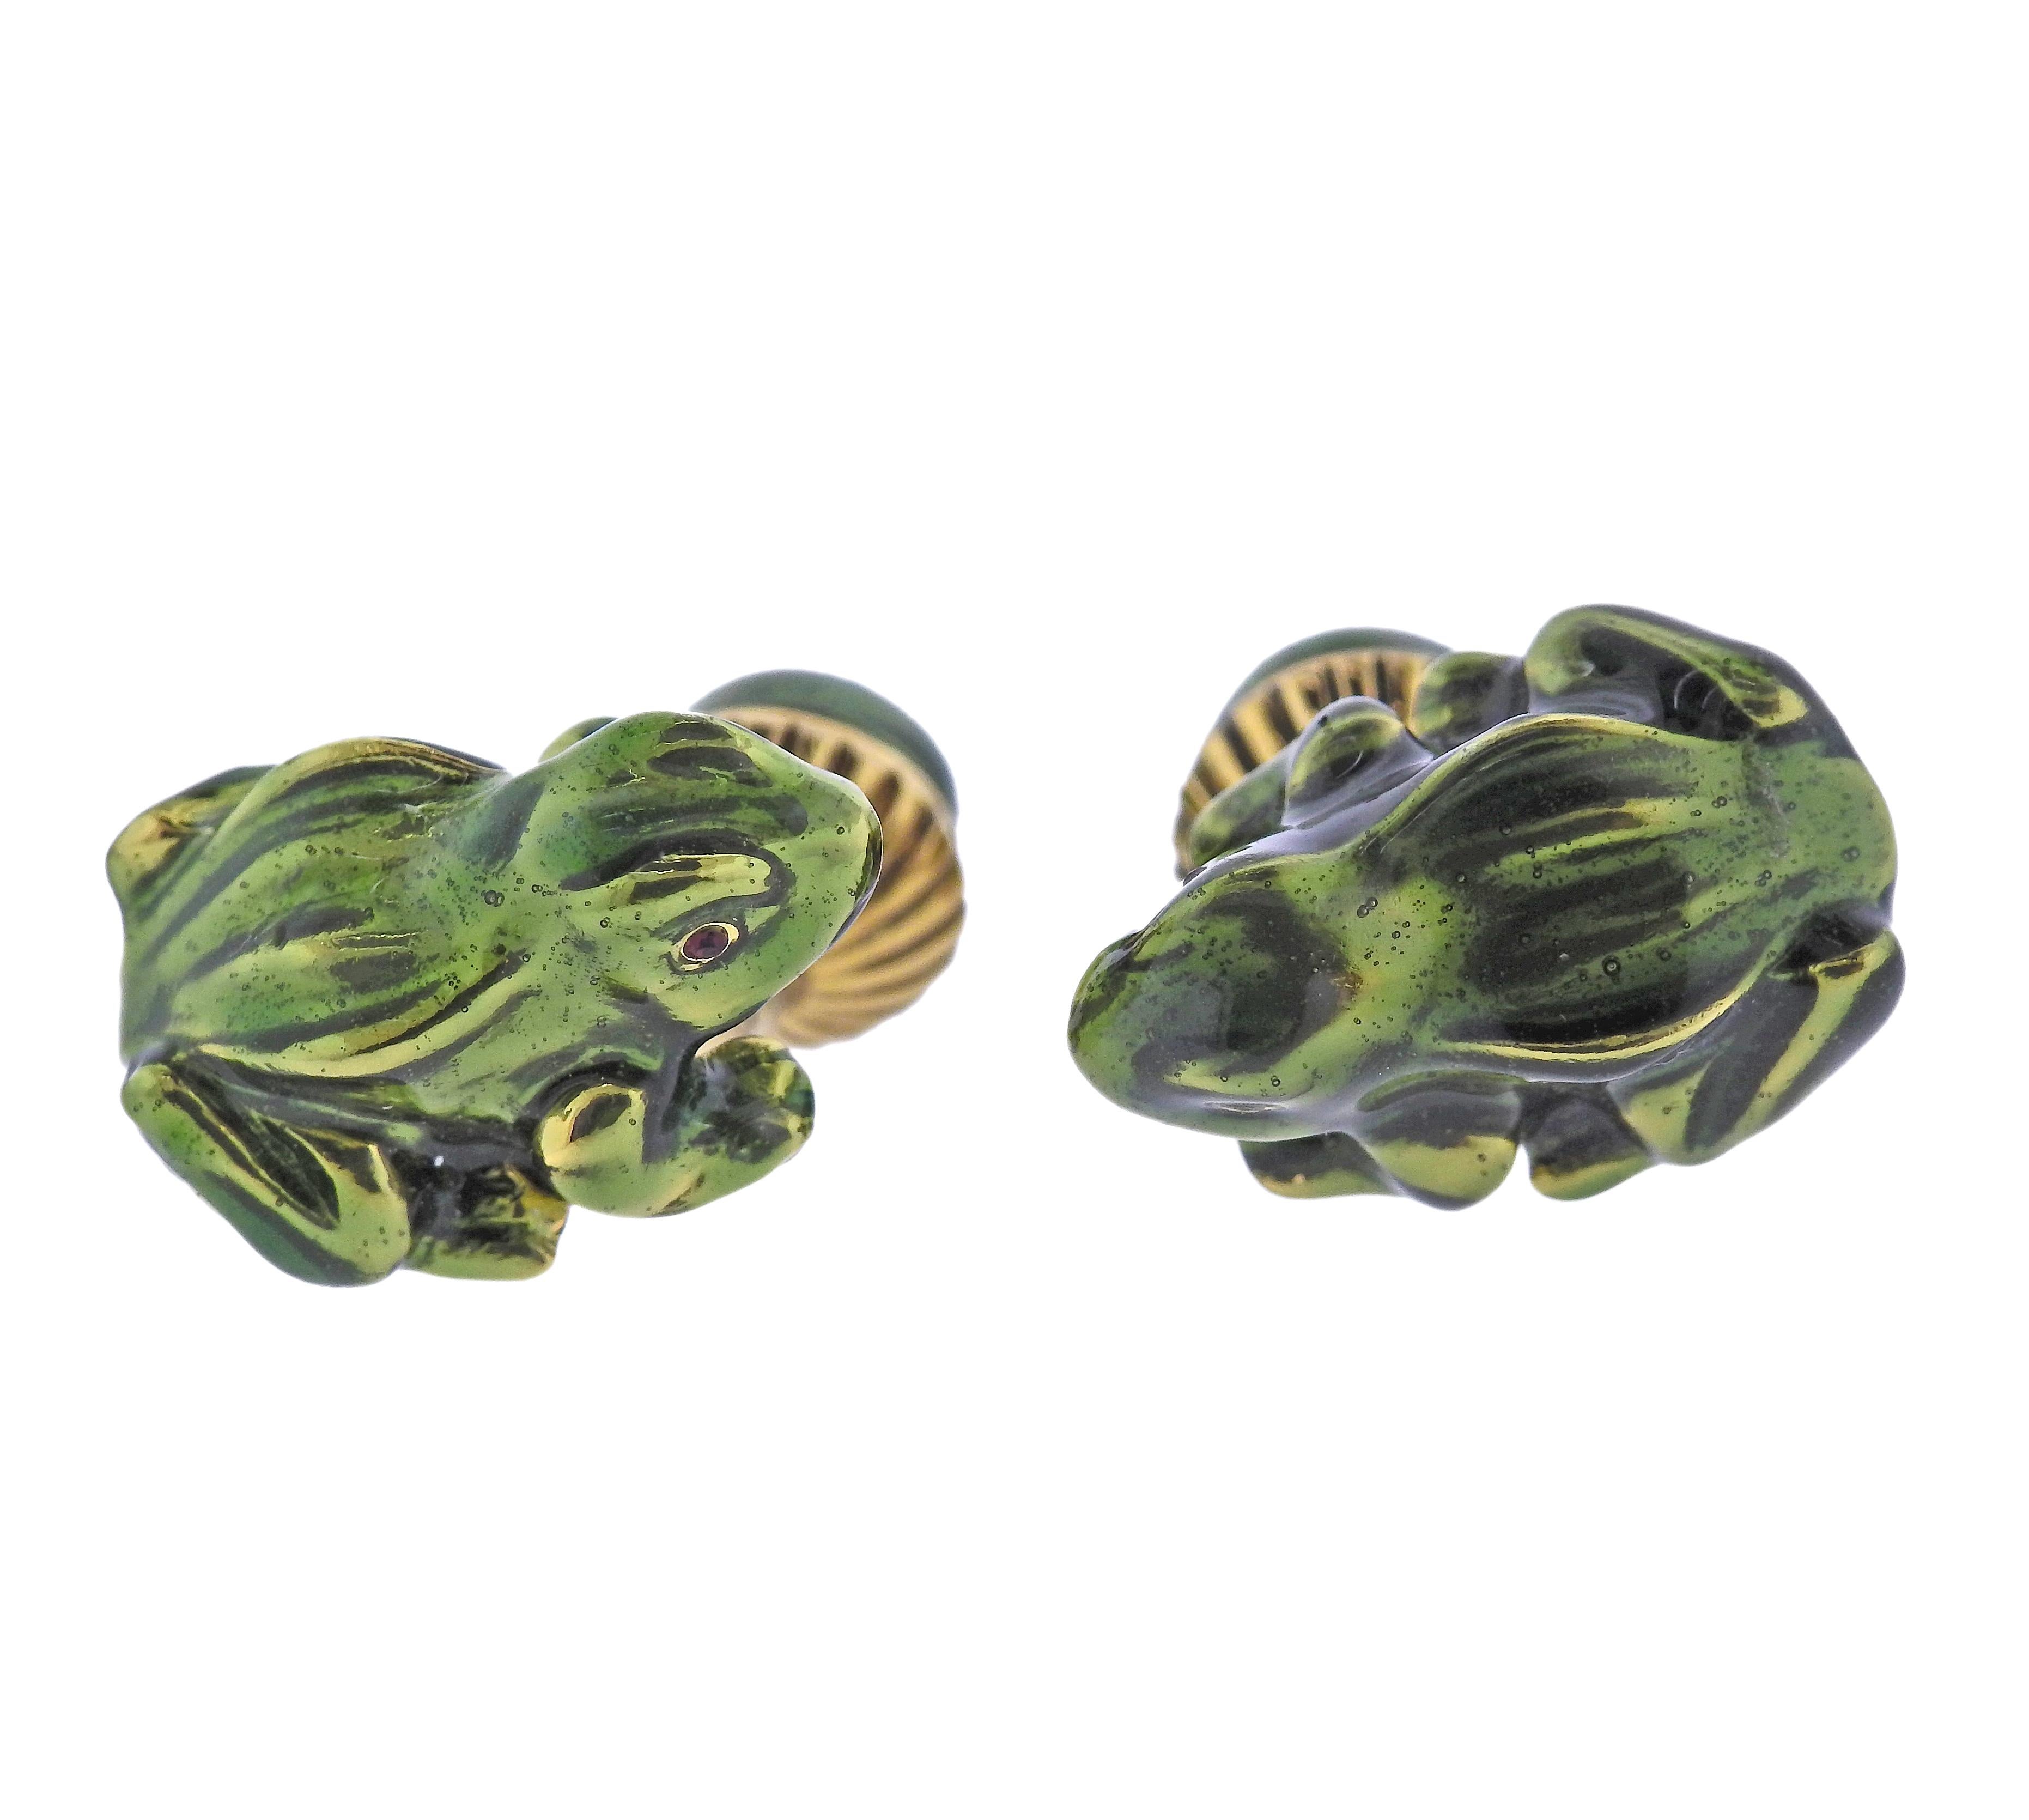 anatomically correct frogs